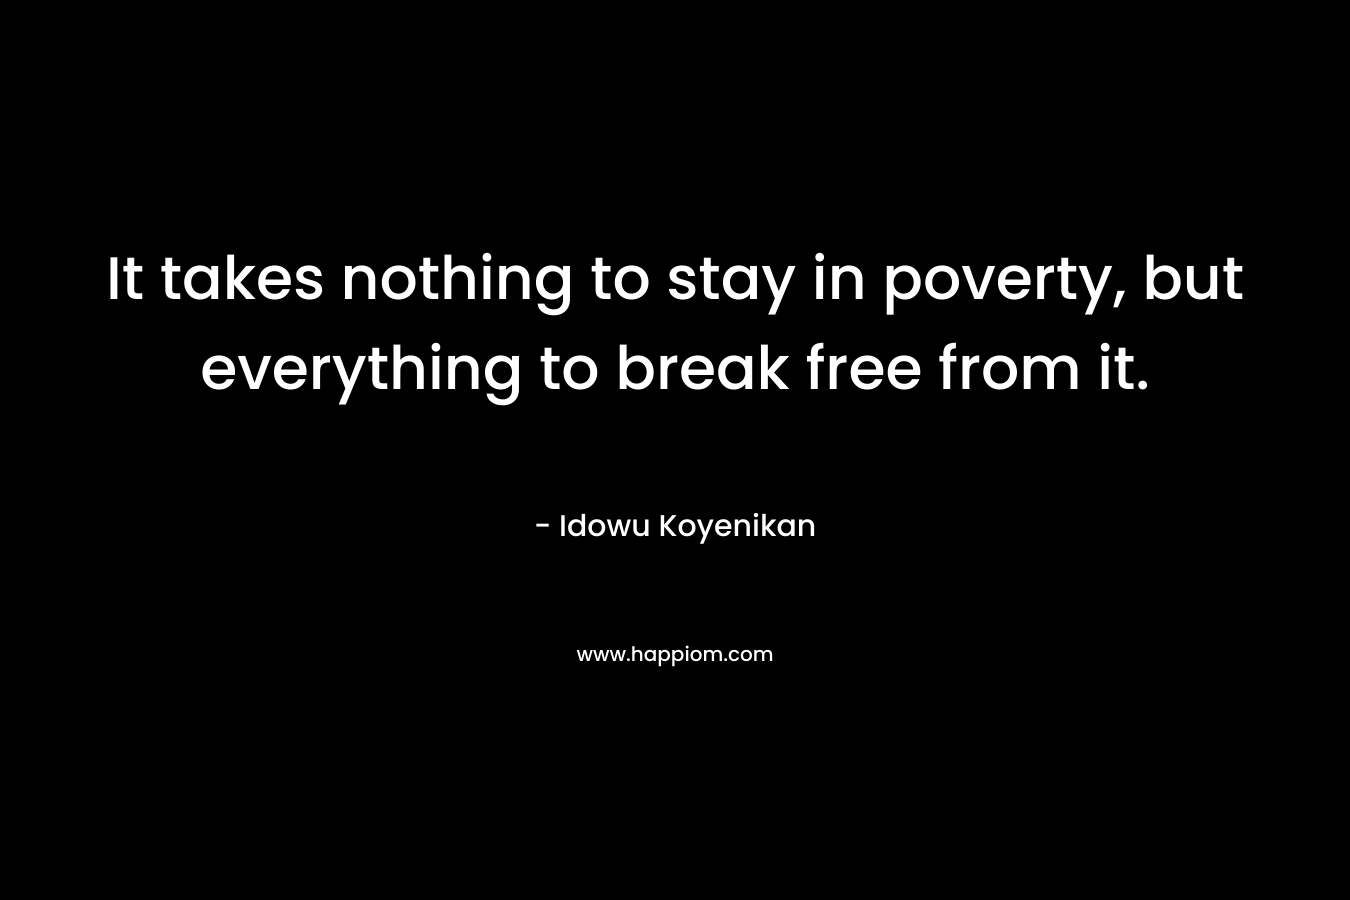 It takes nothing to stay in poverty, but everything to break free from it.